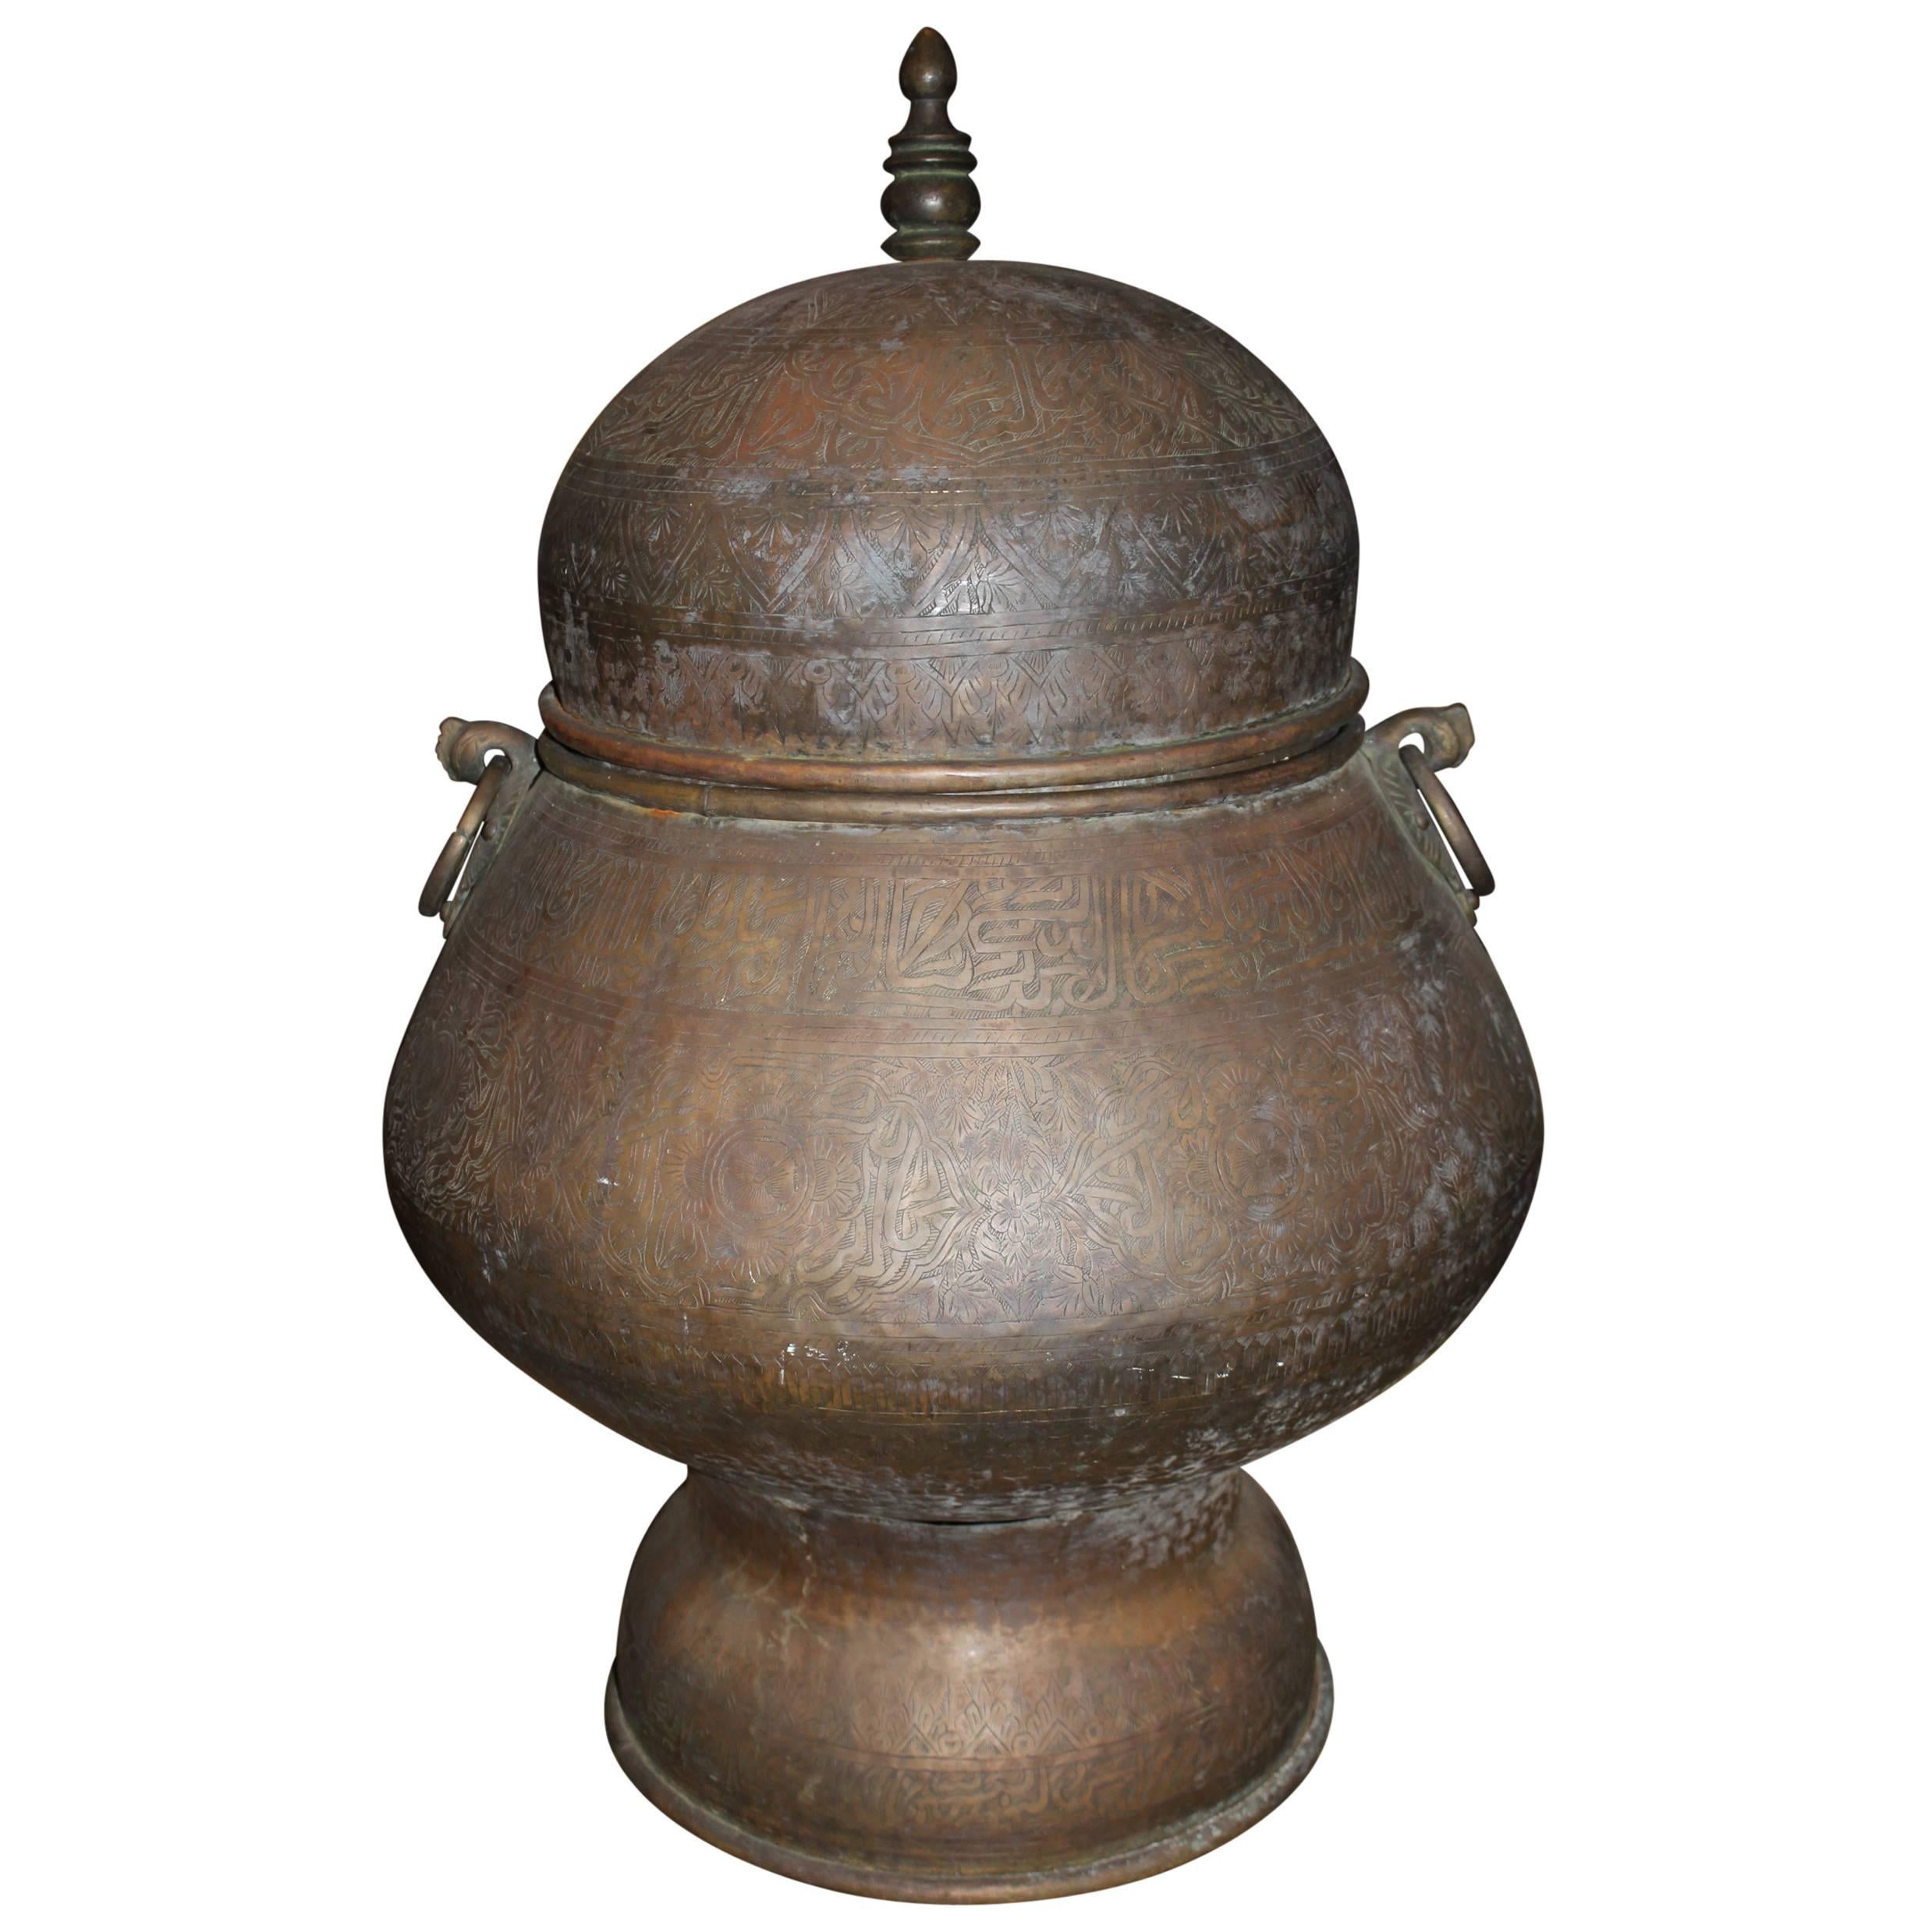 Large Middle Eastern or Persian Covered Copper Urn or Centerpiece